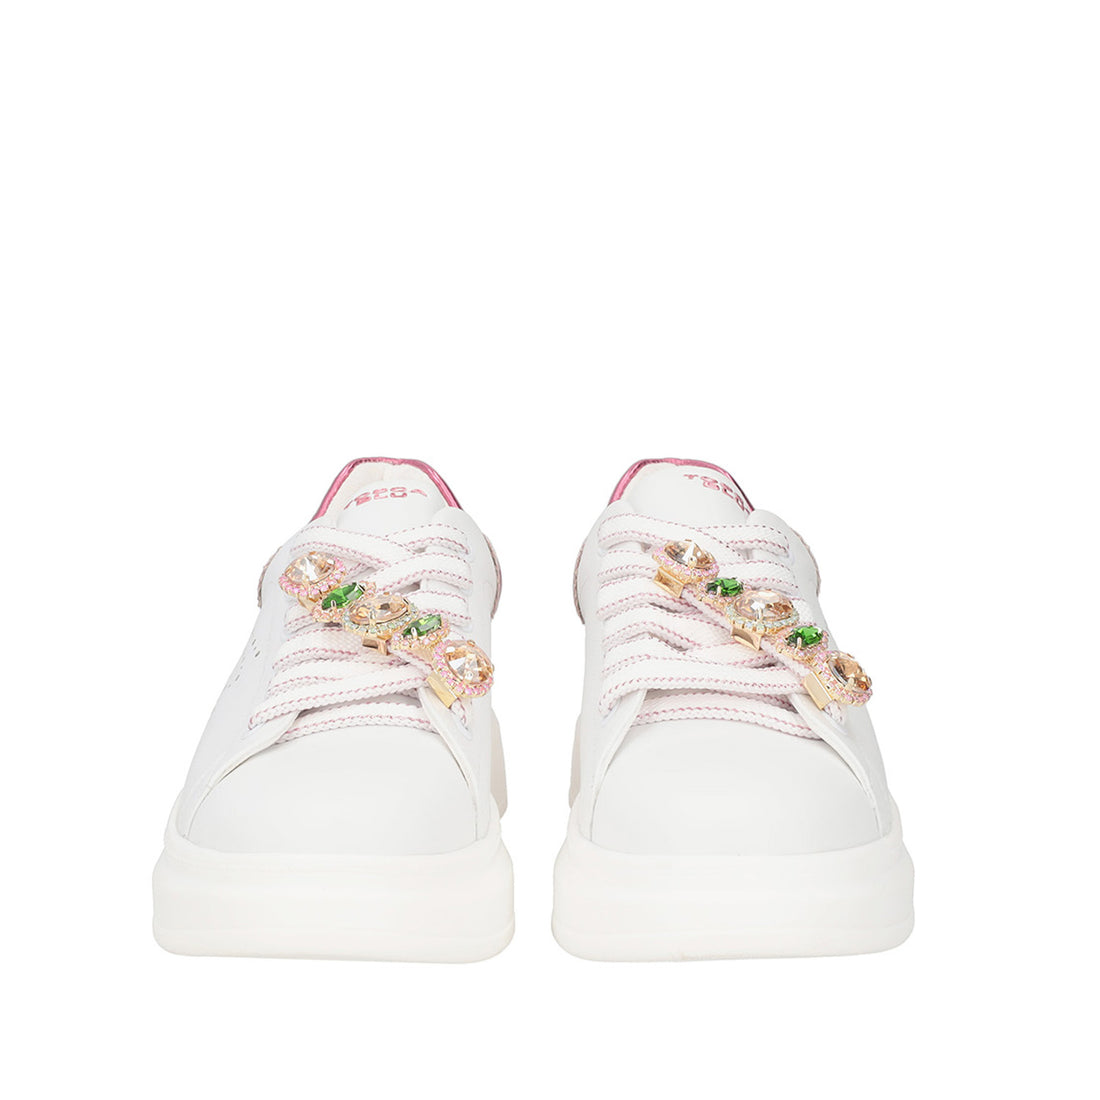 WHITE/FUXIA GLAMOUR  SNEAKER WITH JEWEL CHAIN